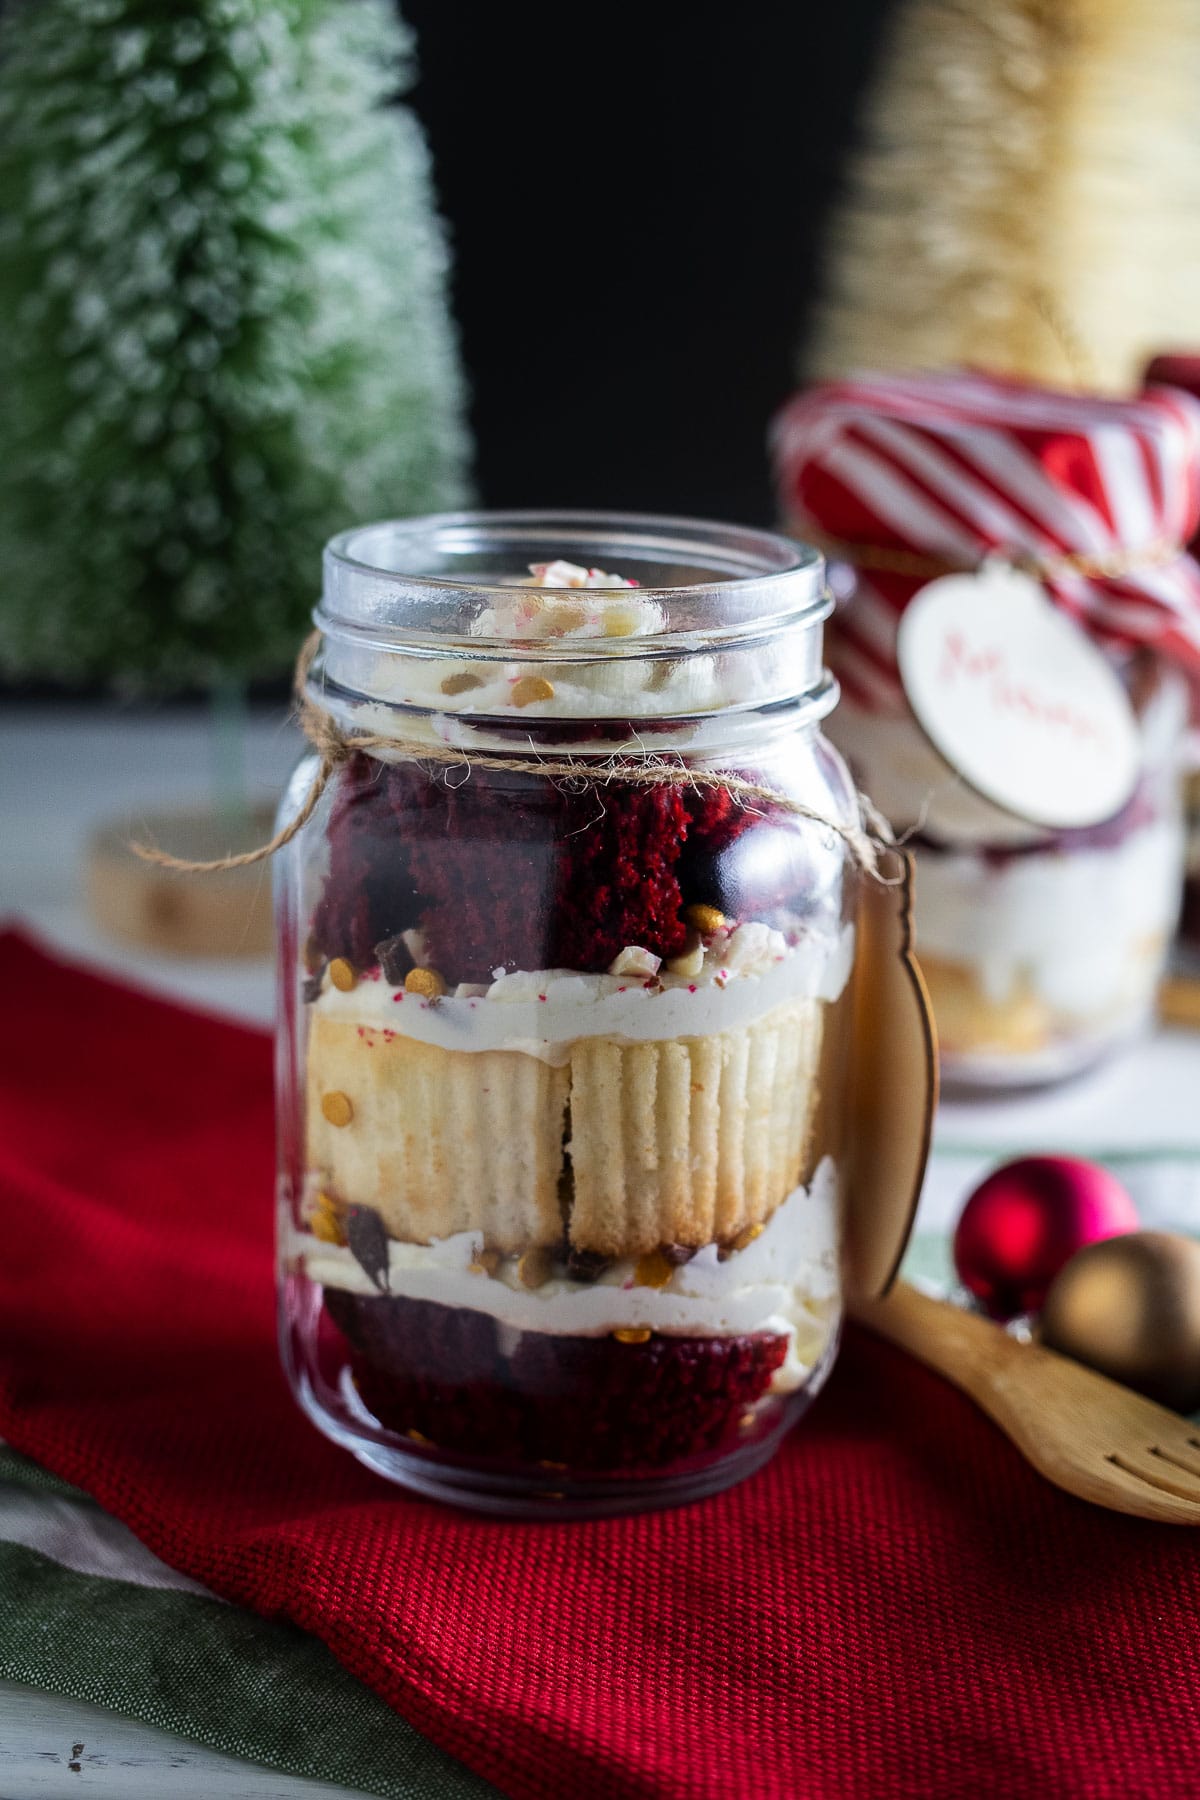 This is an image of the Christmas cake jars with gift versions in the background.